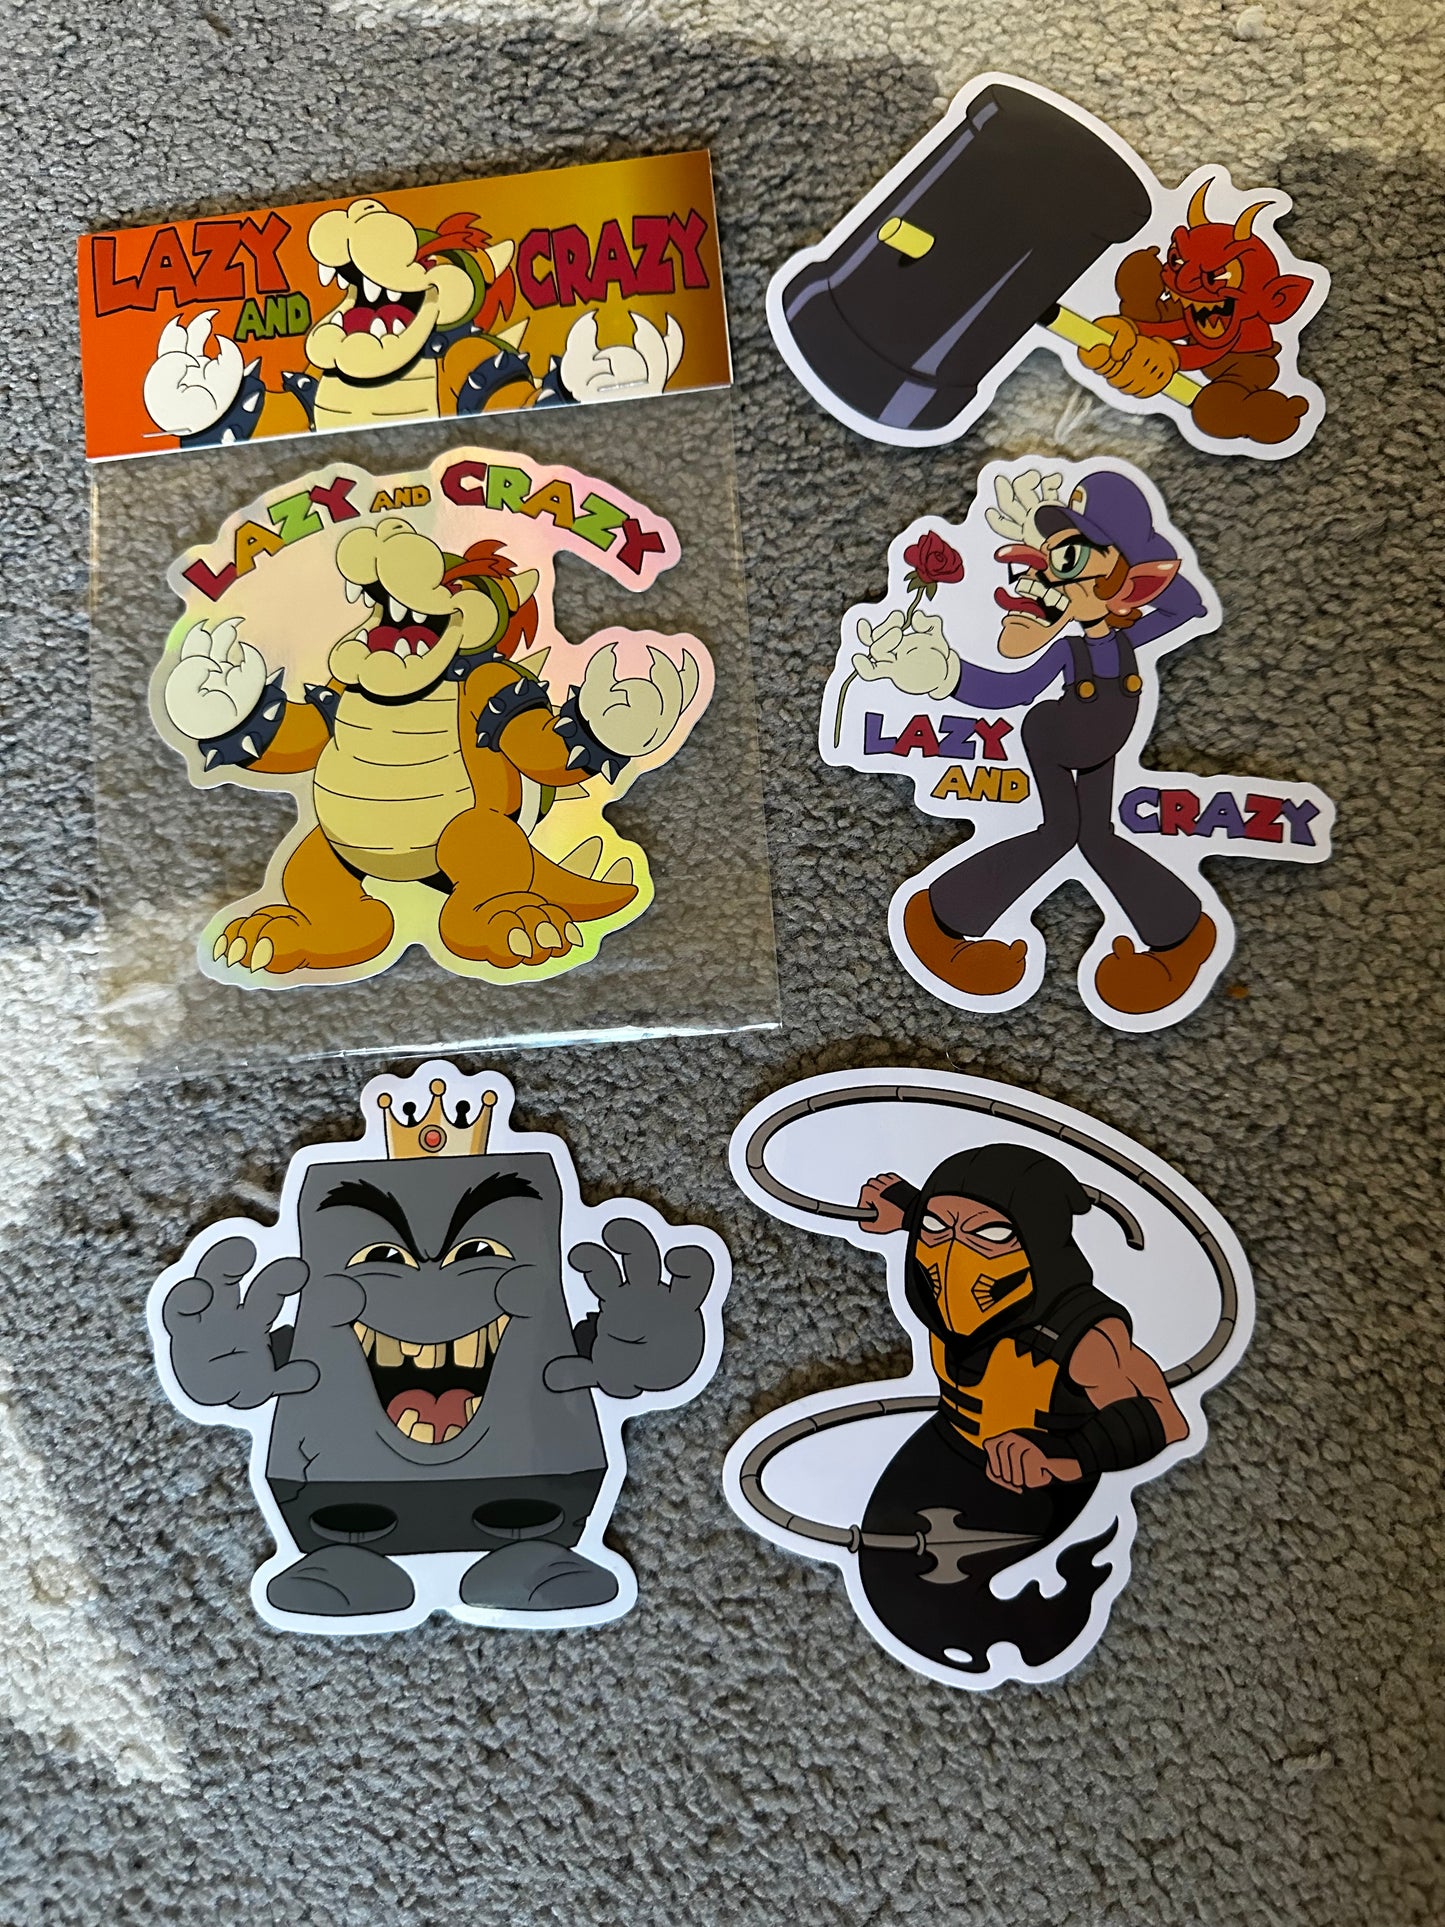 GAMING STICKER PACKS! (Ships today)